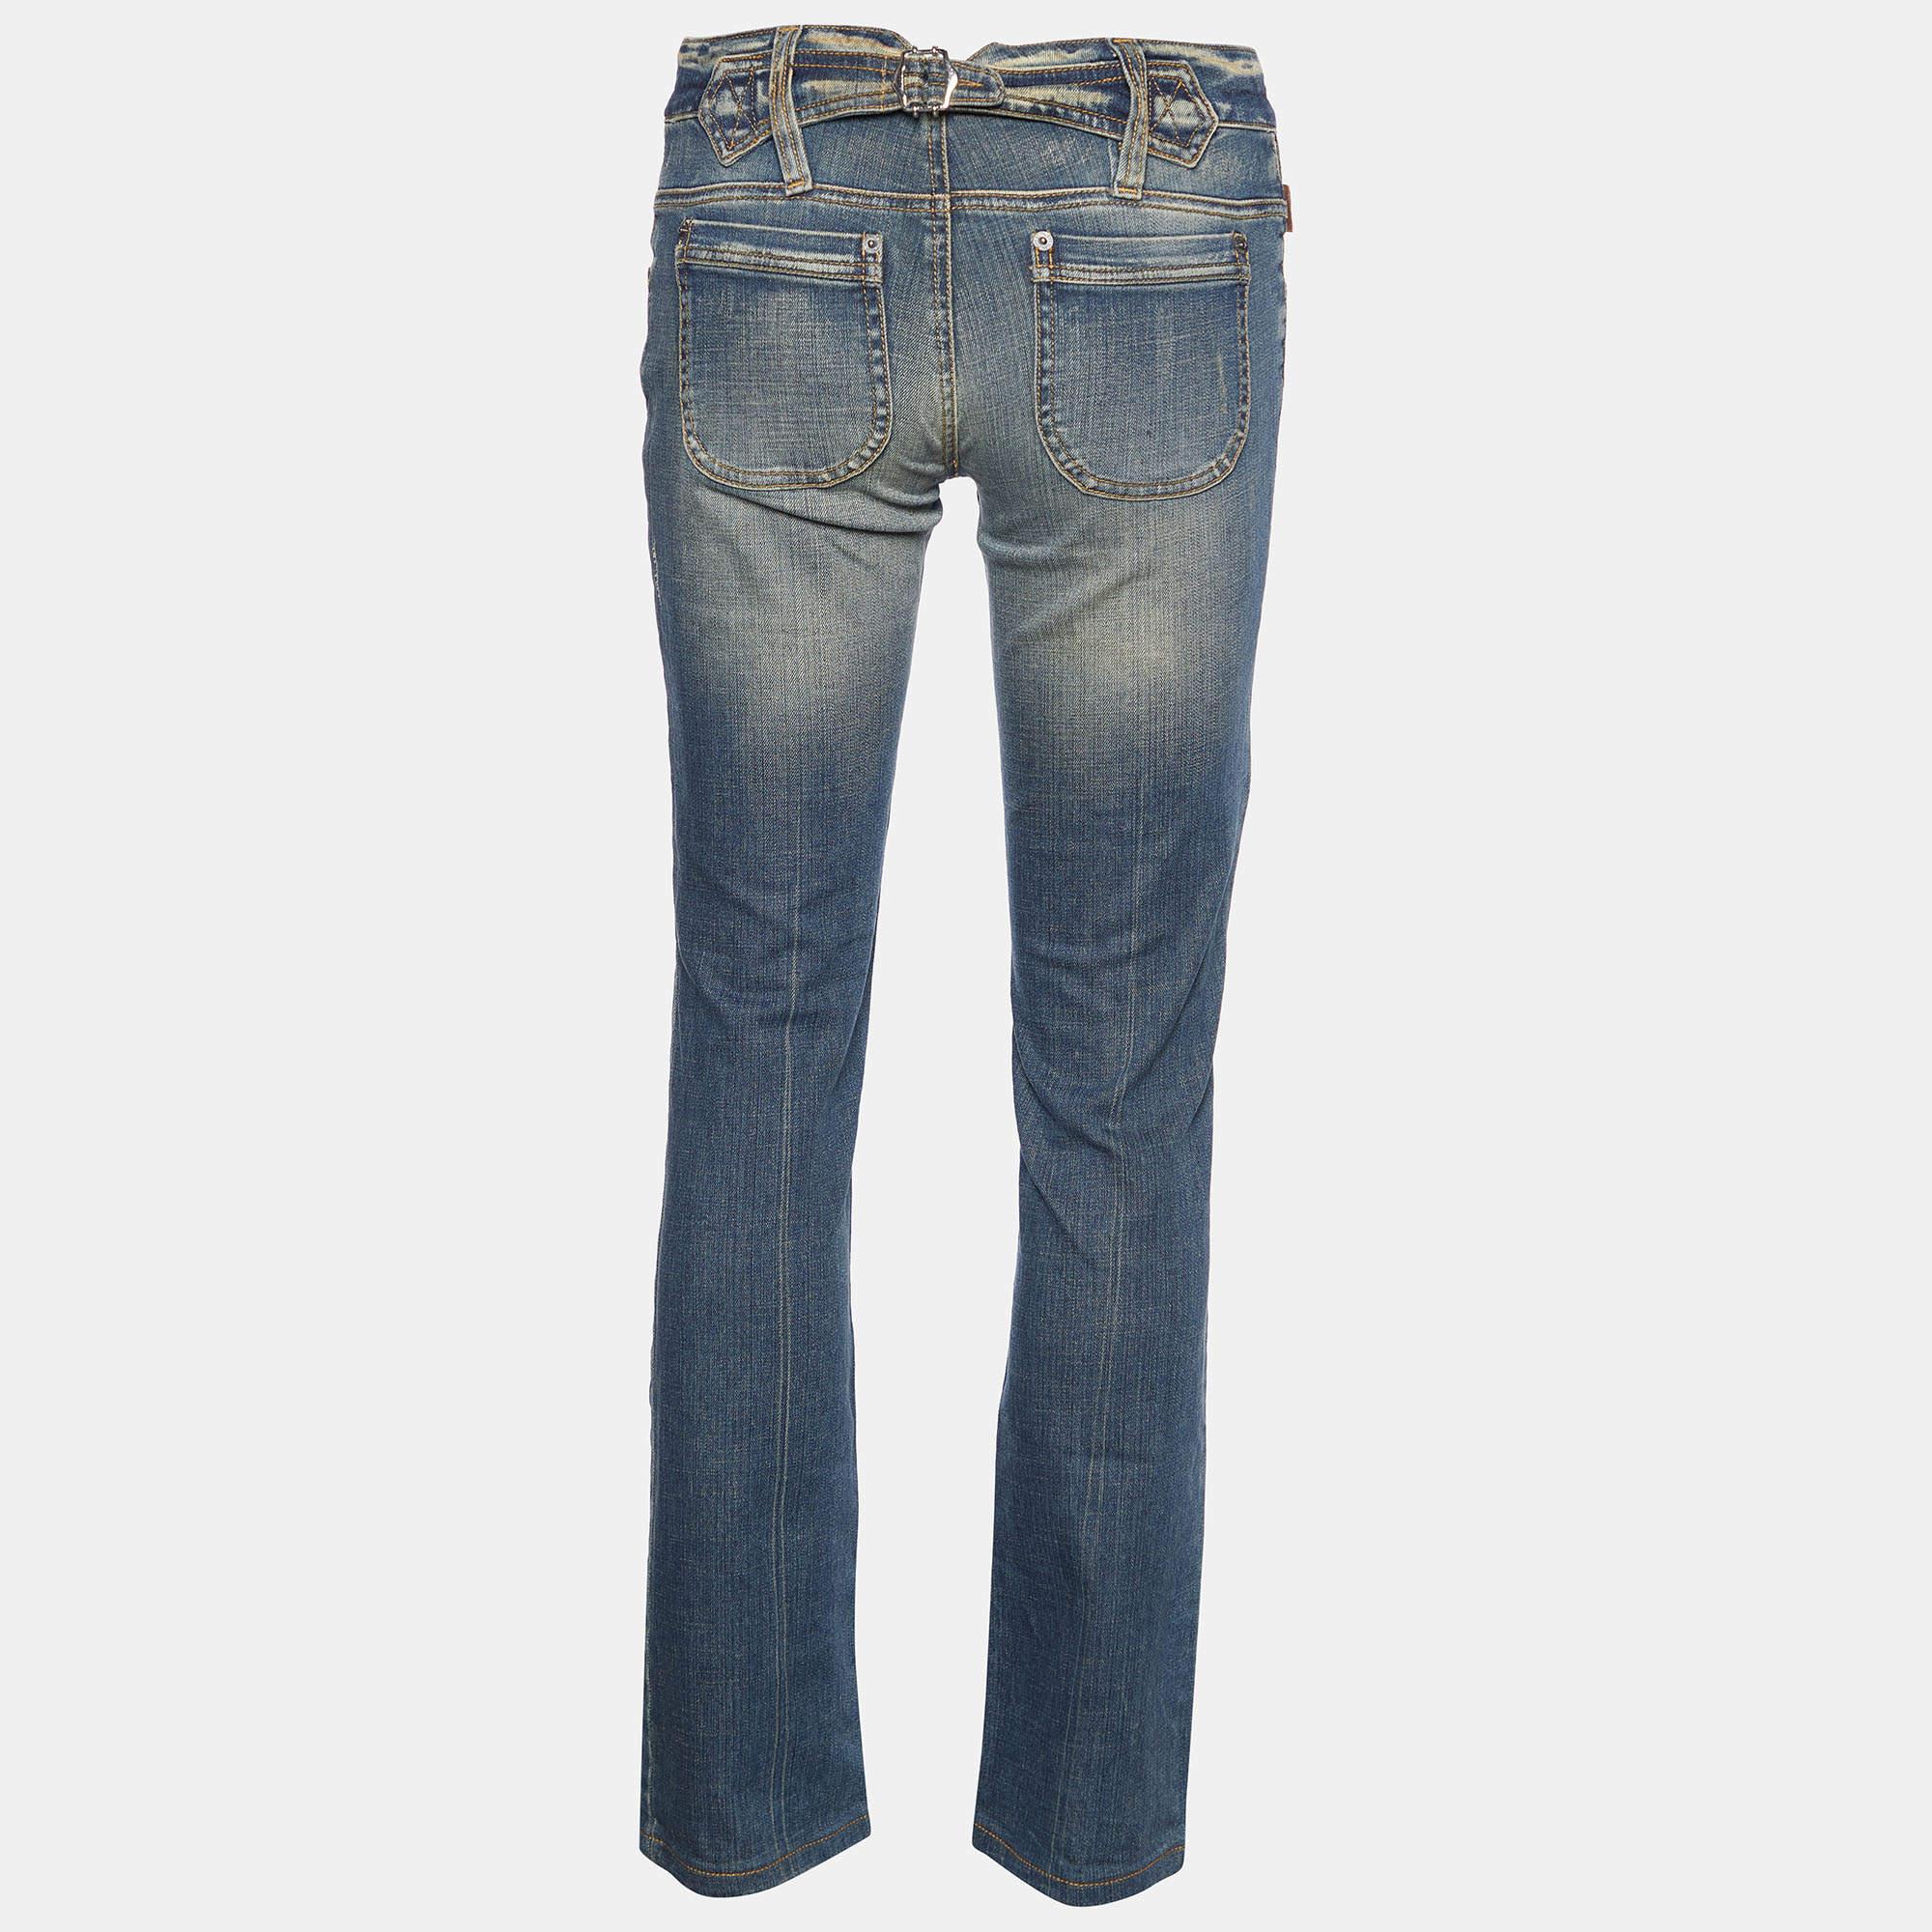 Impeccably tailored jeans are a staple in a well-curated wardrobe. These designer jeans are finely sewn to give you the desired look and all-day comfort.

